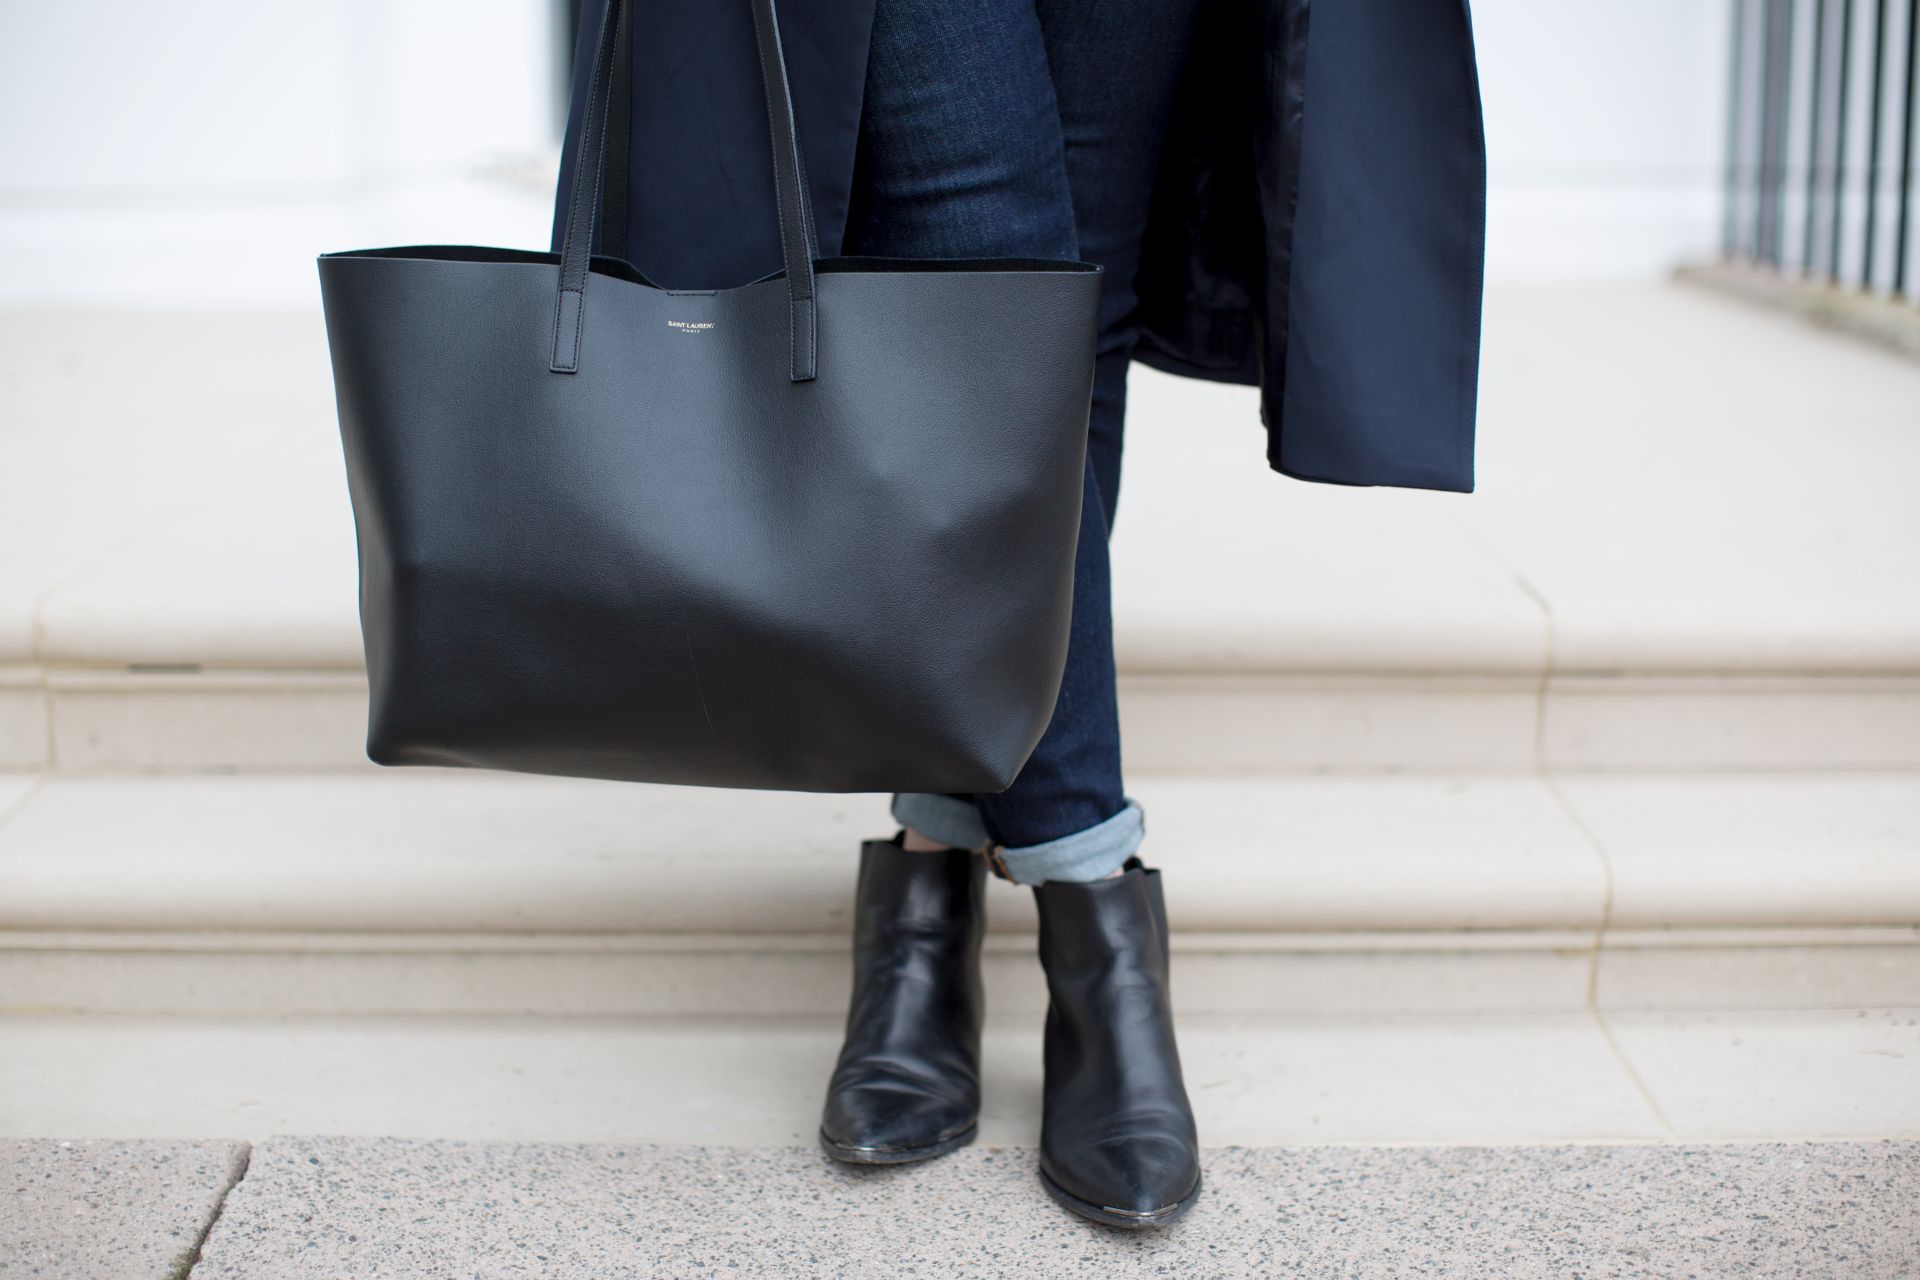 8 Everyday Designer Bags That Are Worth Every Penny - The Mom Edit